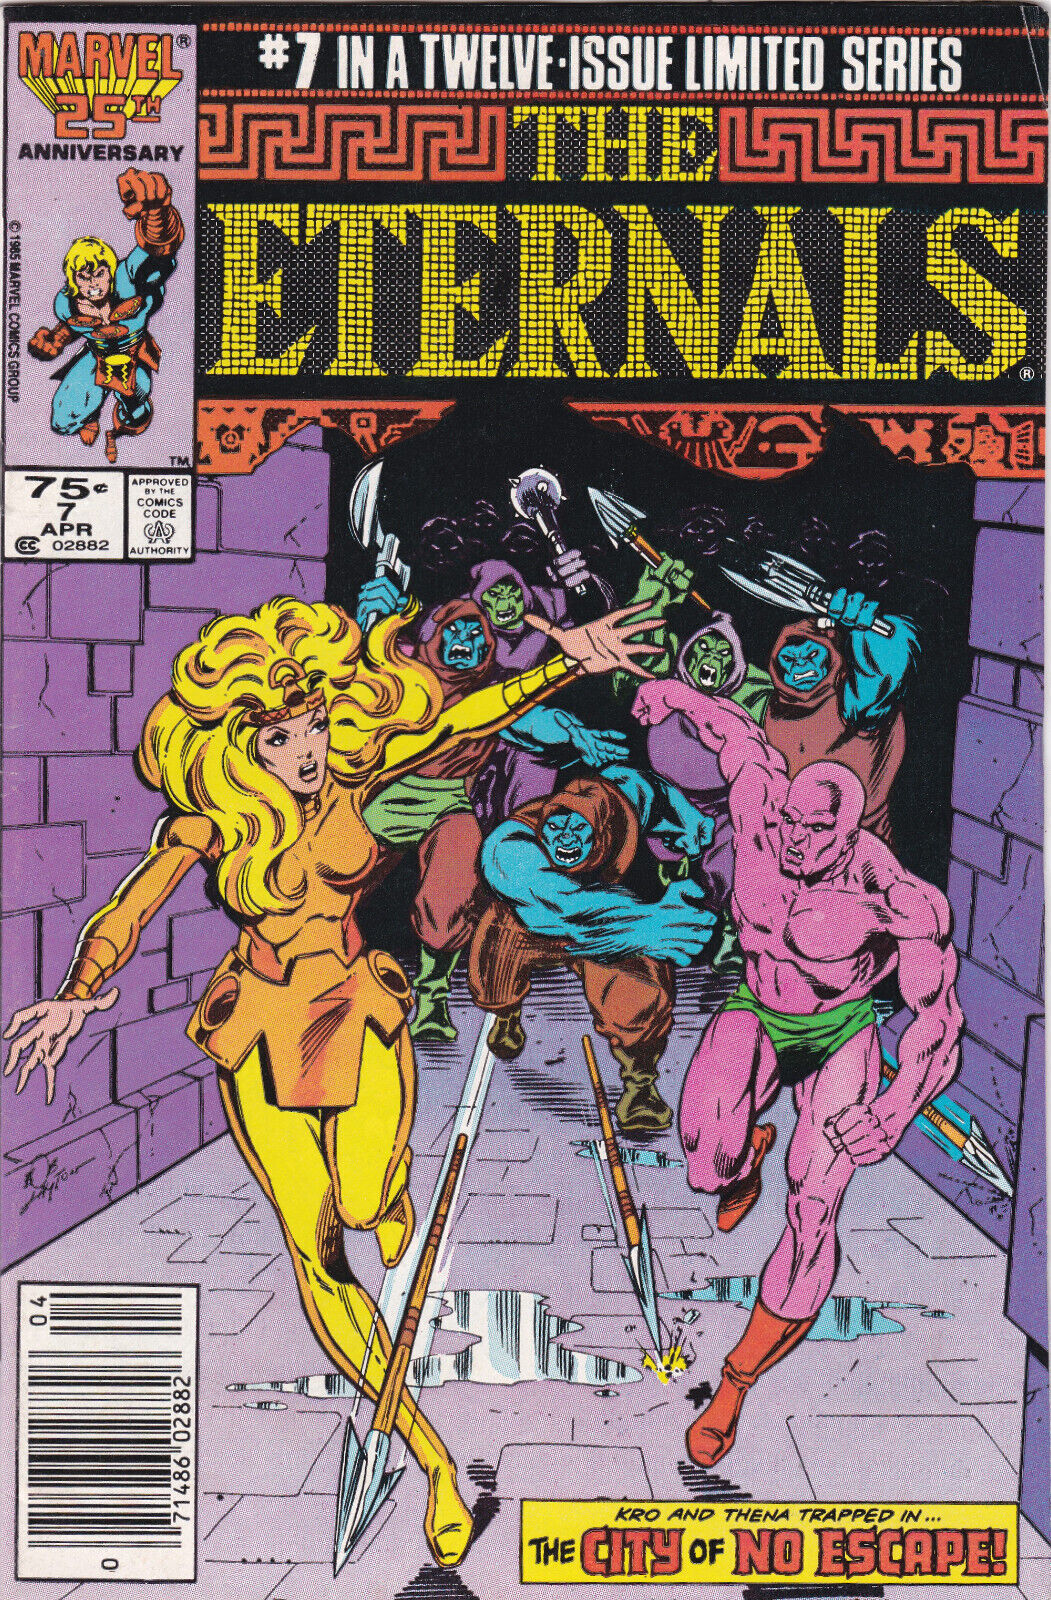 The Eternals, #7 of 12, Marvel Comics, 1985, Copper Age, Newsstand